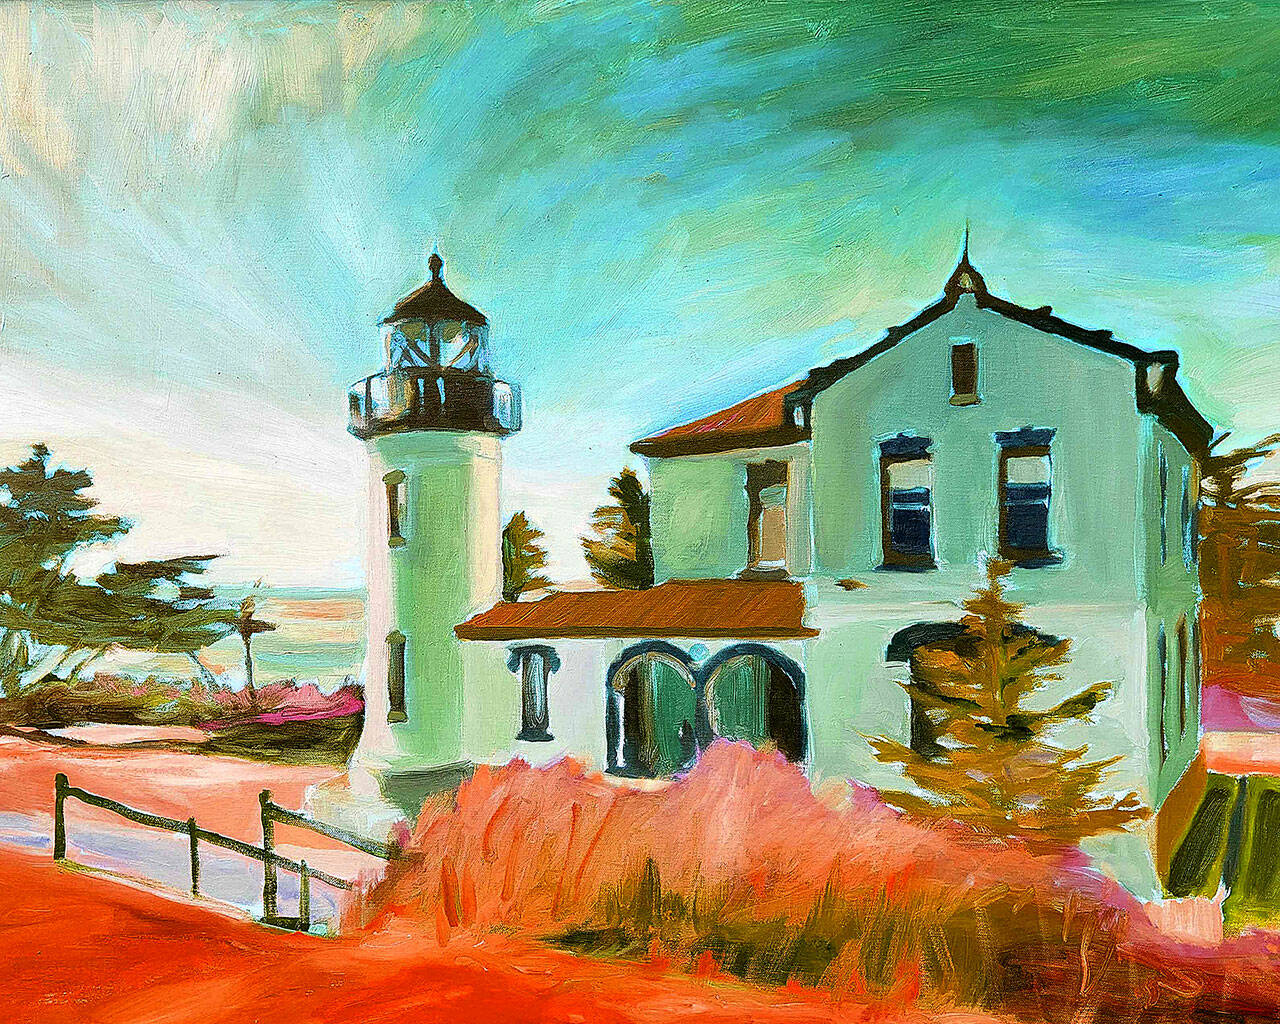 See oil paintings by Timothy Haslet, such as “Admiralty Head Lighthouse” at the Penn Cove Gallery in Coupeville through Oct. 31.